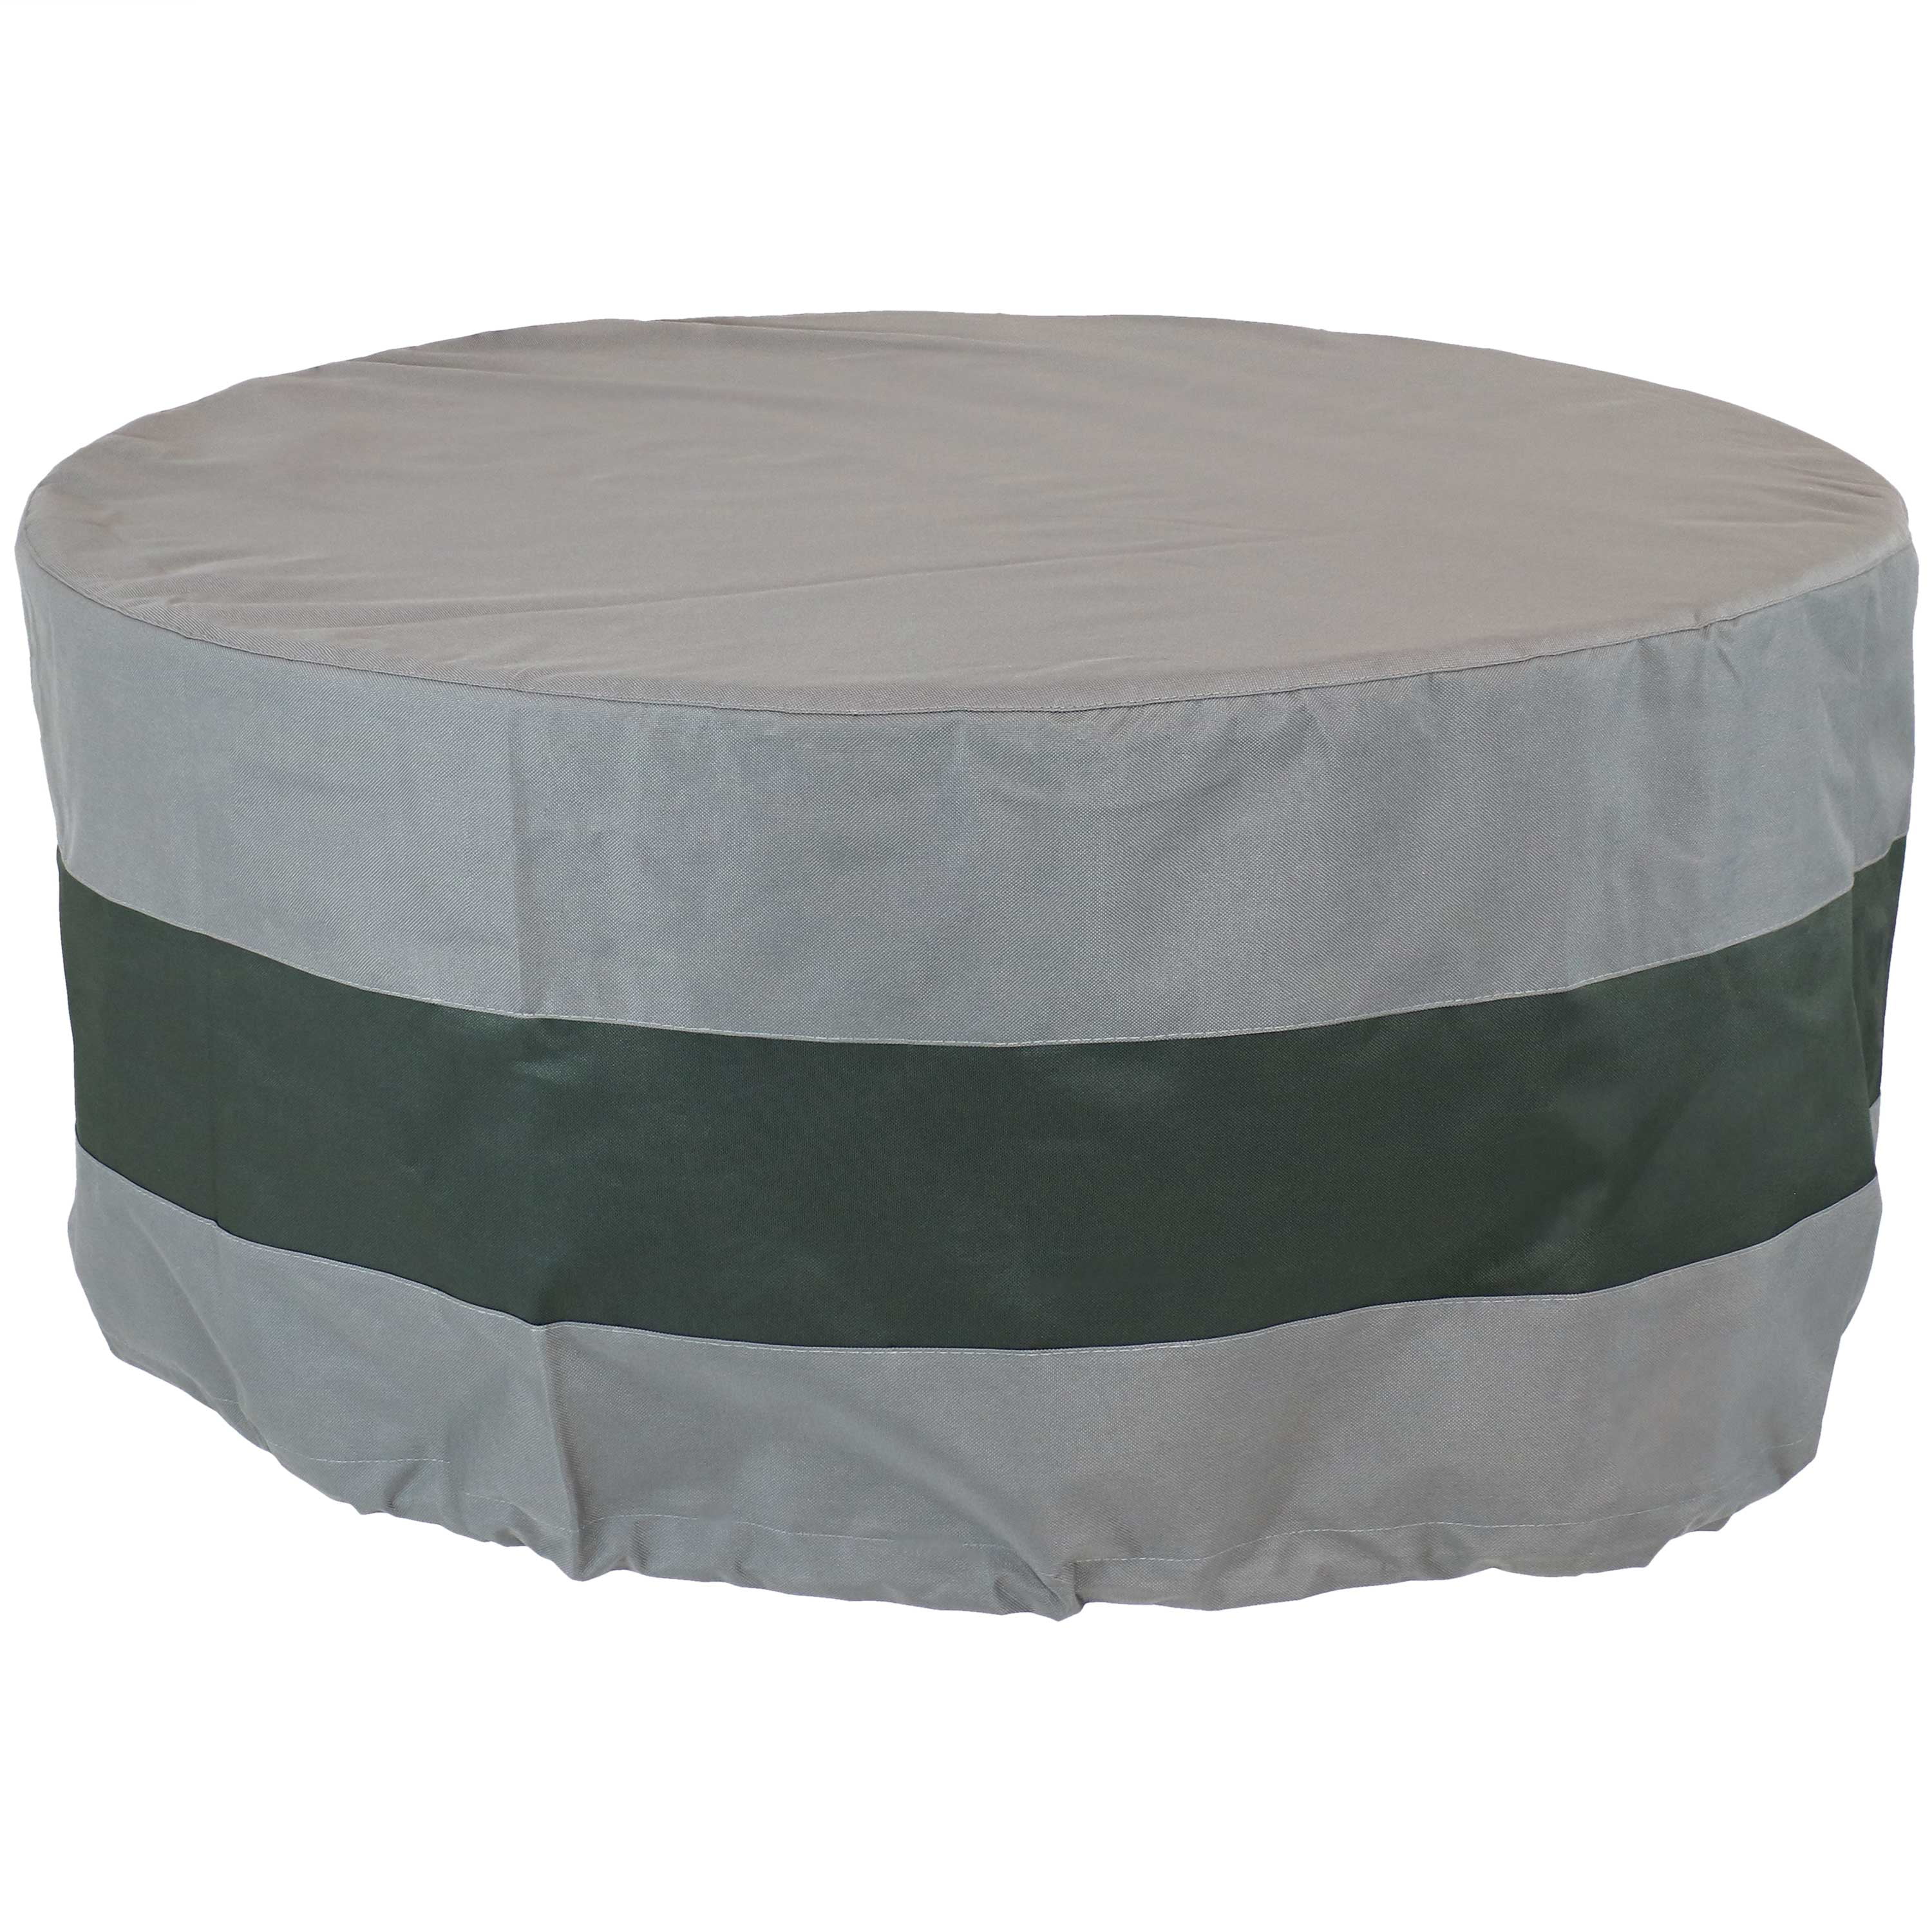 Sunnydaze Black Round Fire Pit Cover Heavy-Duty 300D Polyester 30-Inch